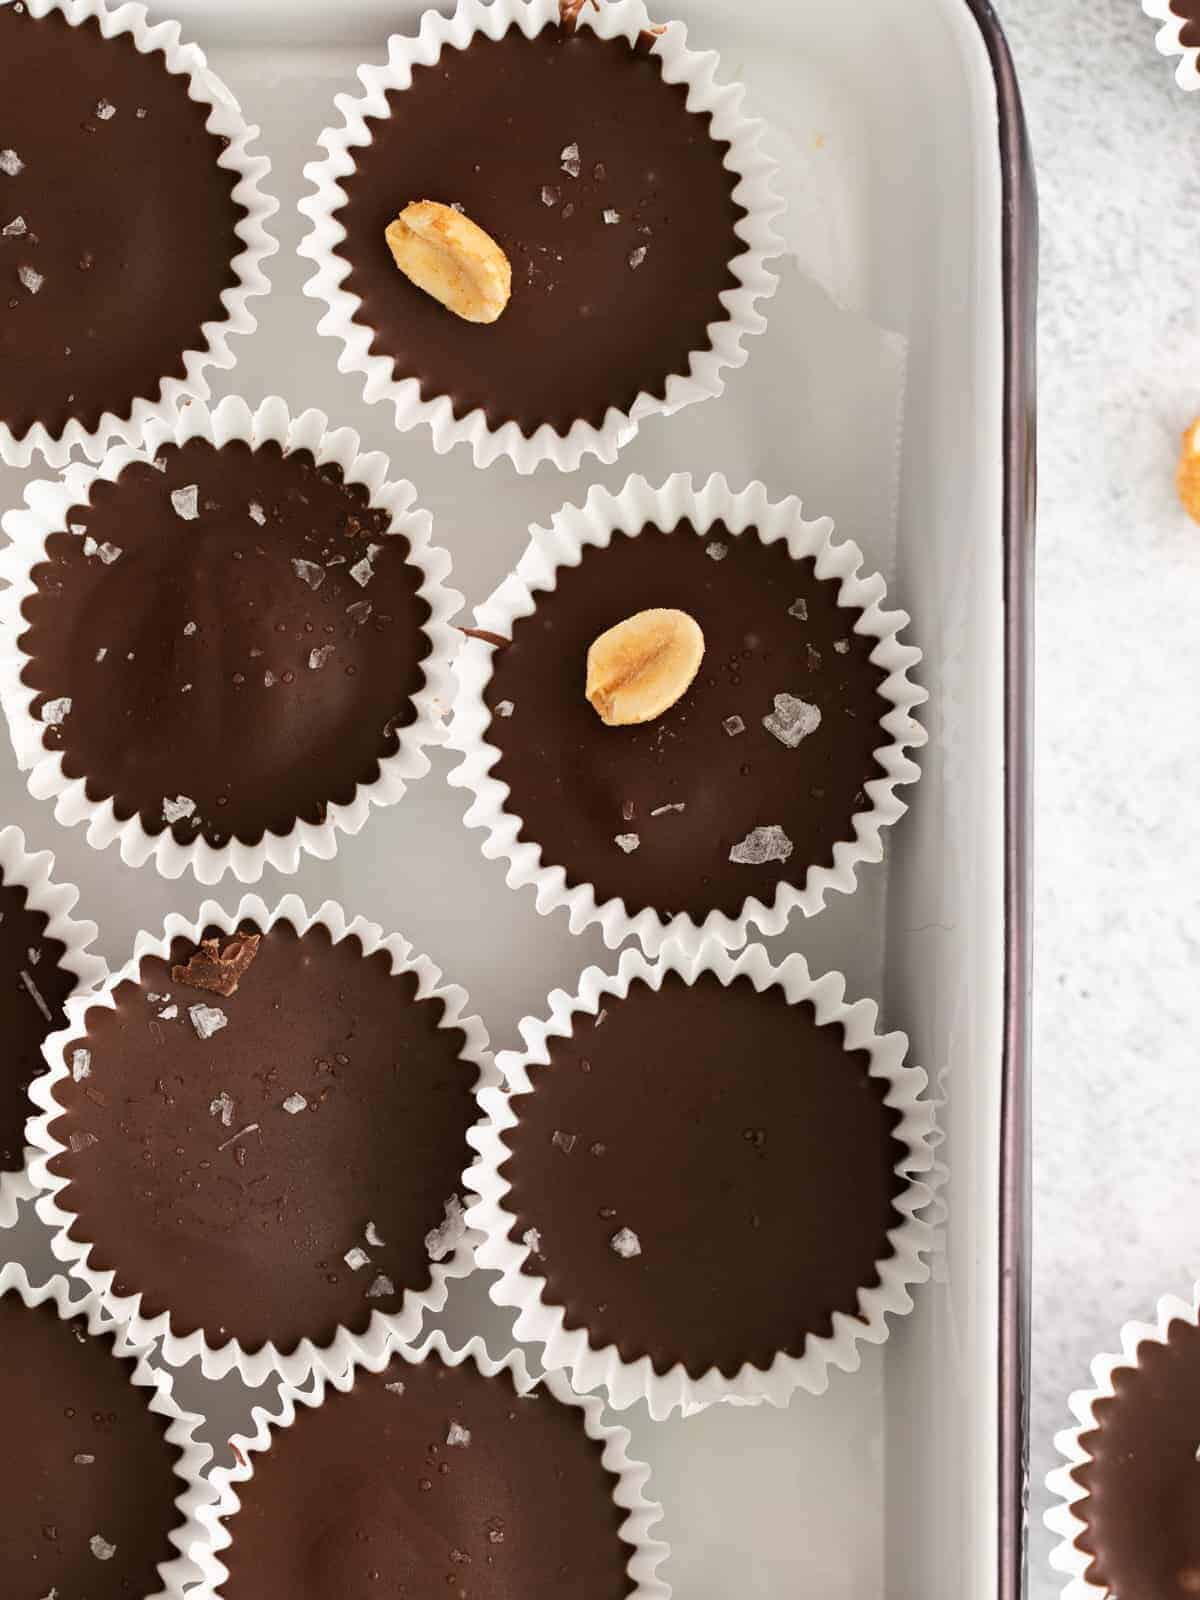 Chocolate peanut butter cups in a baking pan, topped with sea salt.